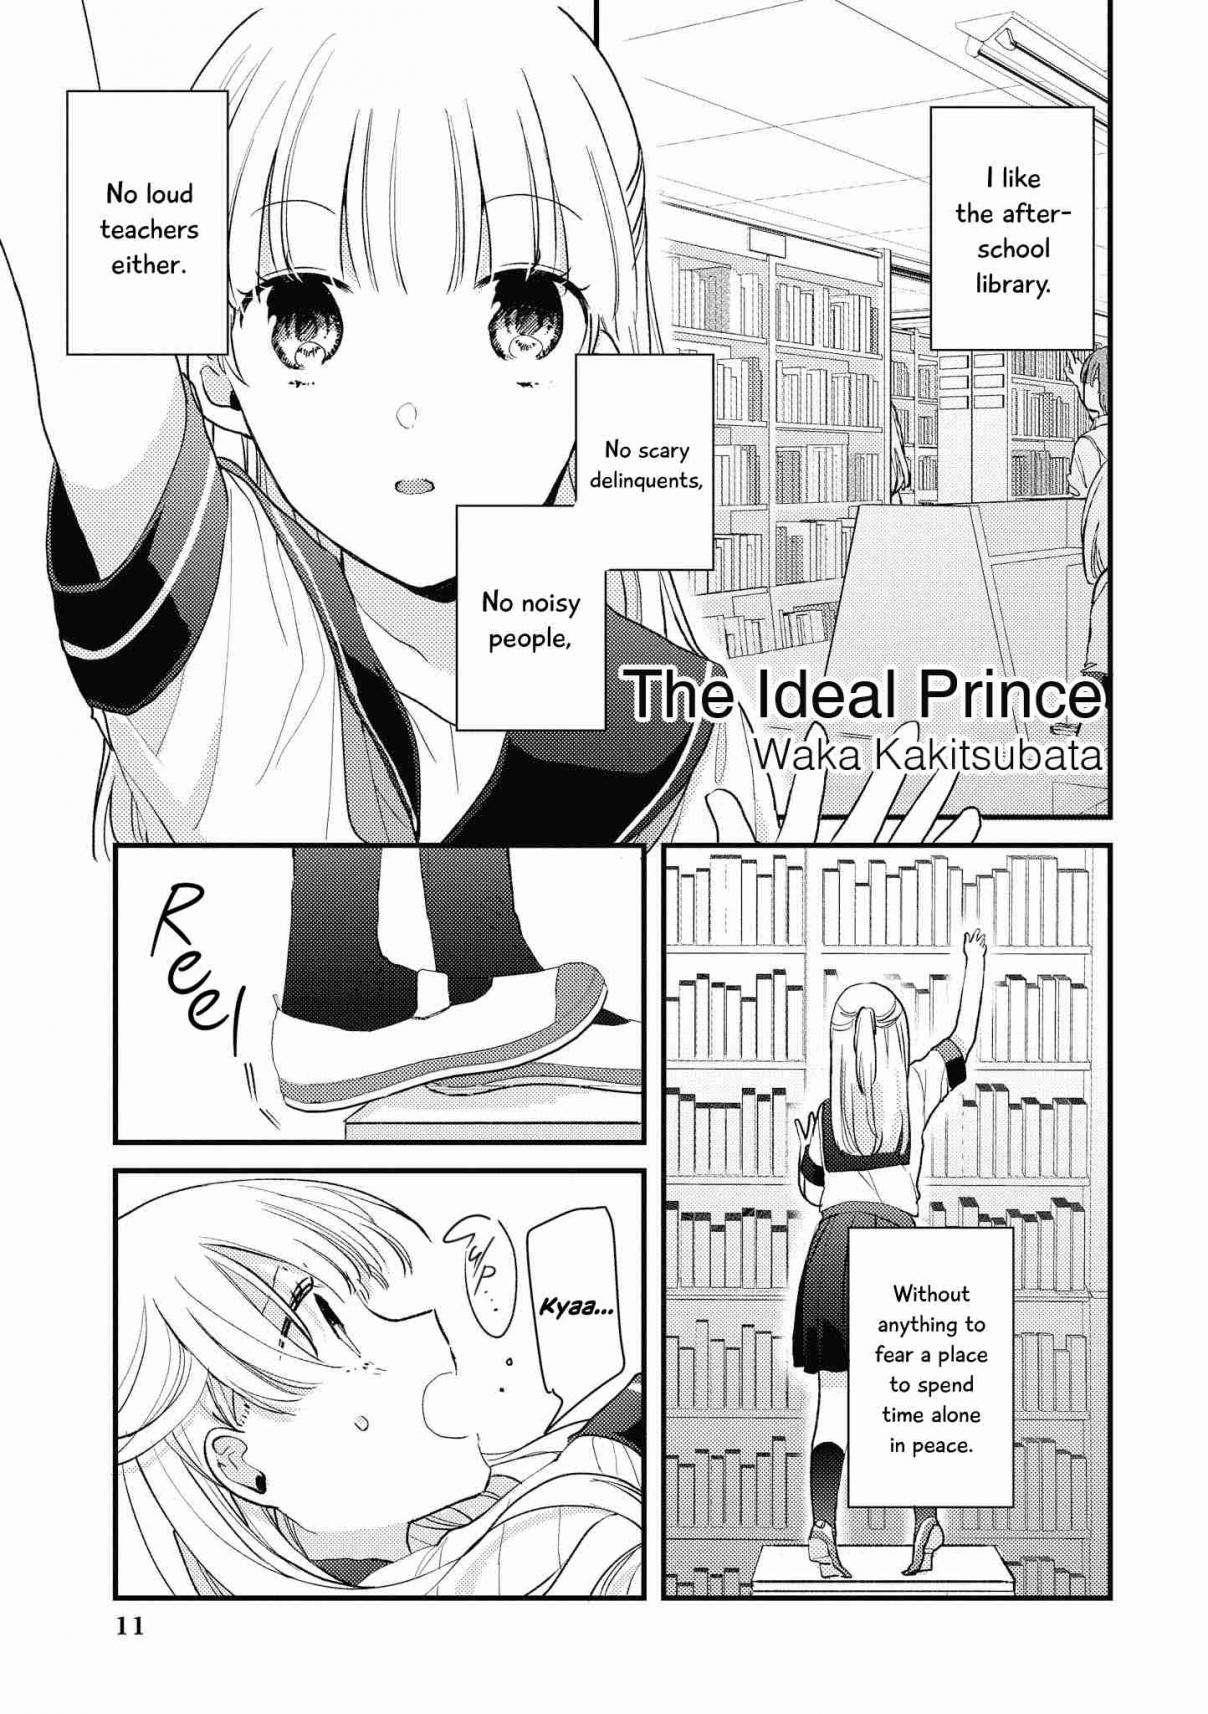 “It’s Too Precious and Hard to Read!!” 4P Short Stories Vol. 2 Ch. 28 The Ideal Prince [by Waka Kakistubata]